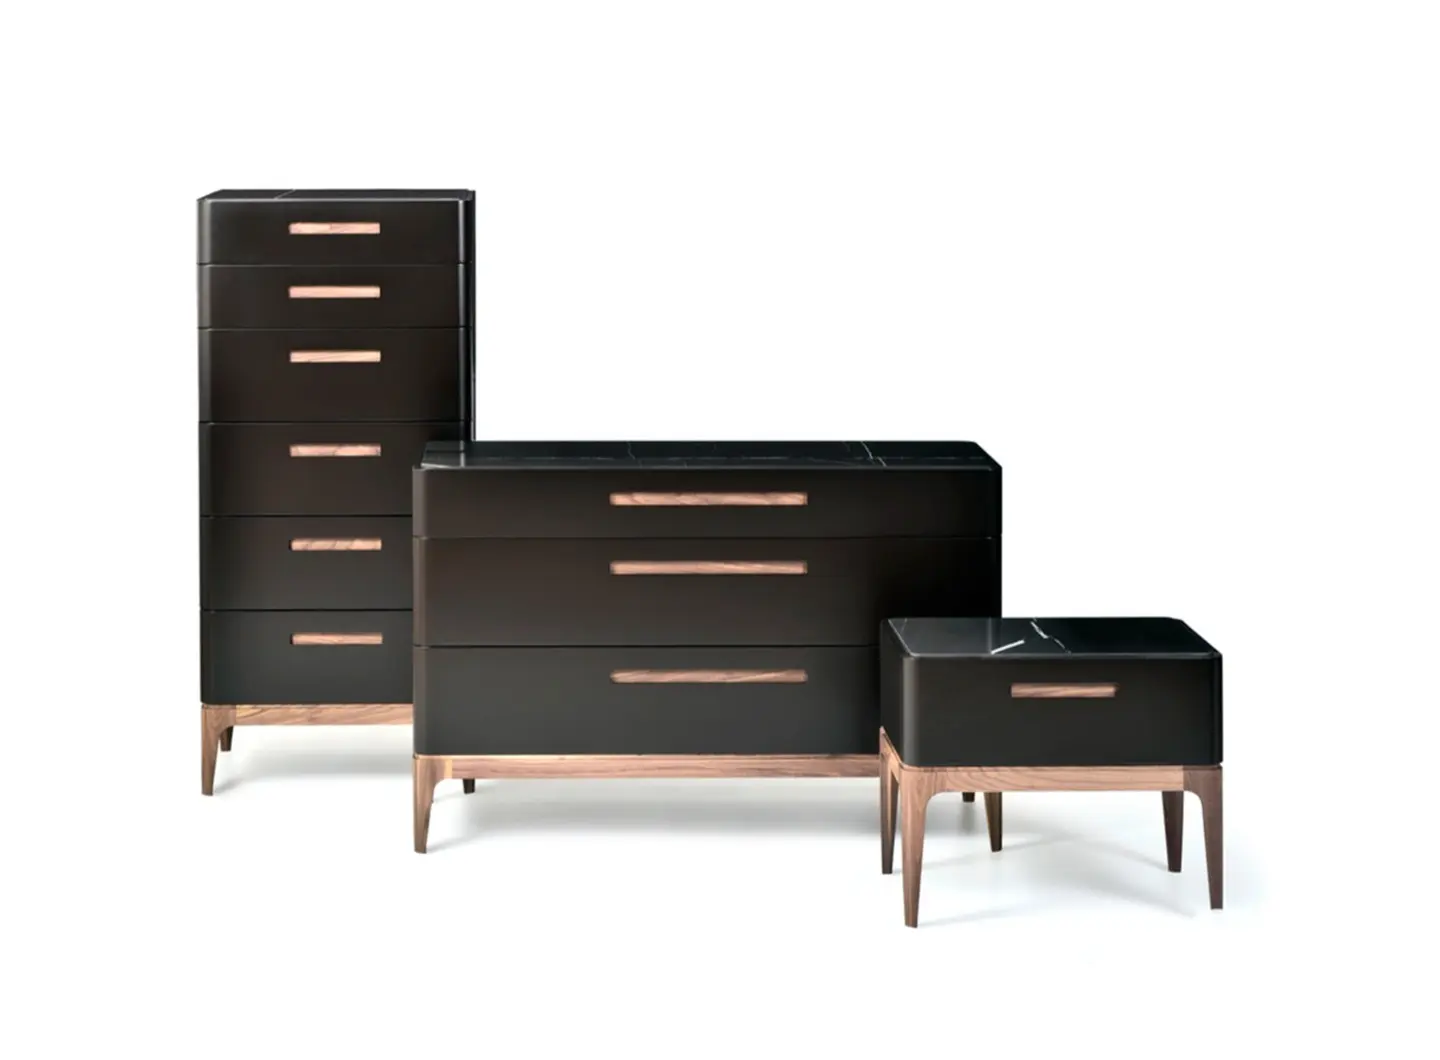 de-code - Eclipse chest of drawers